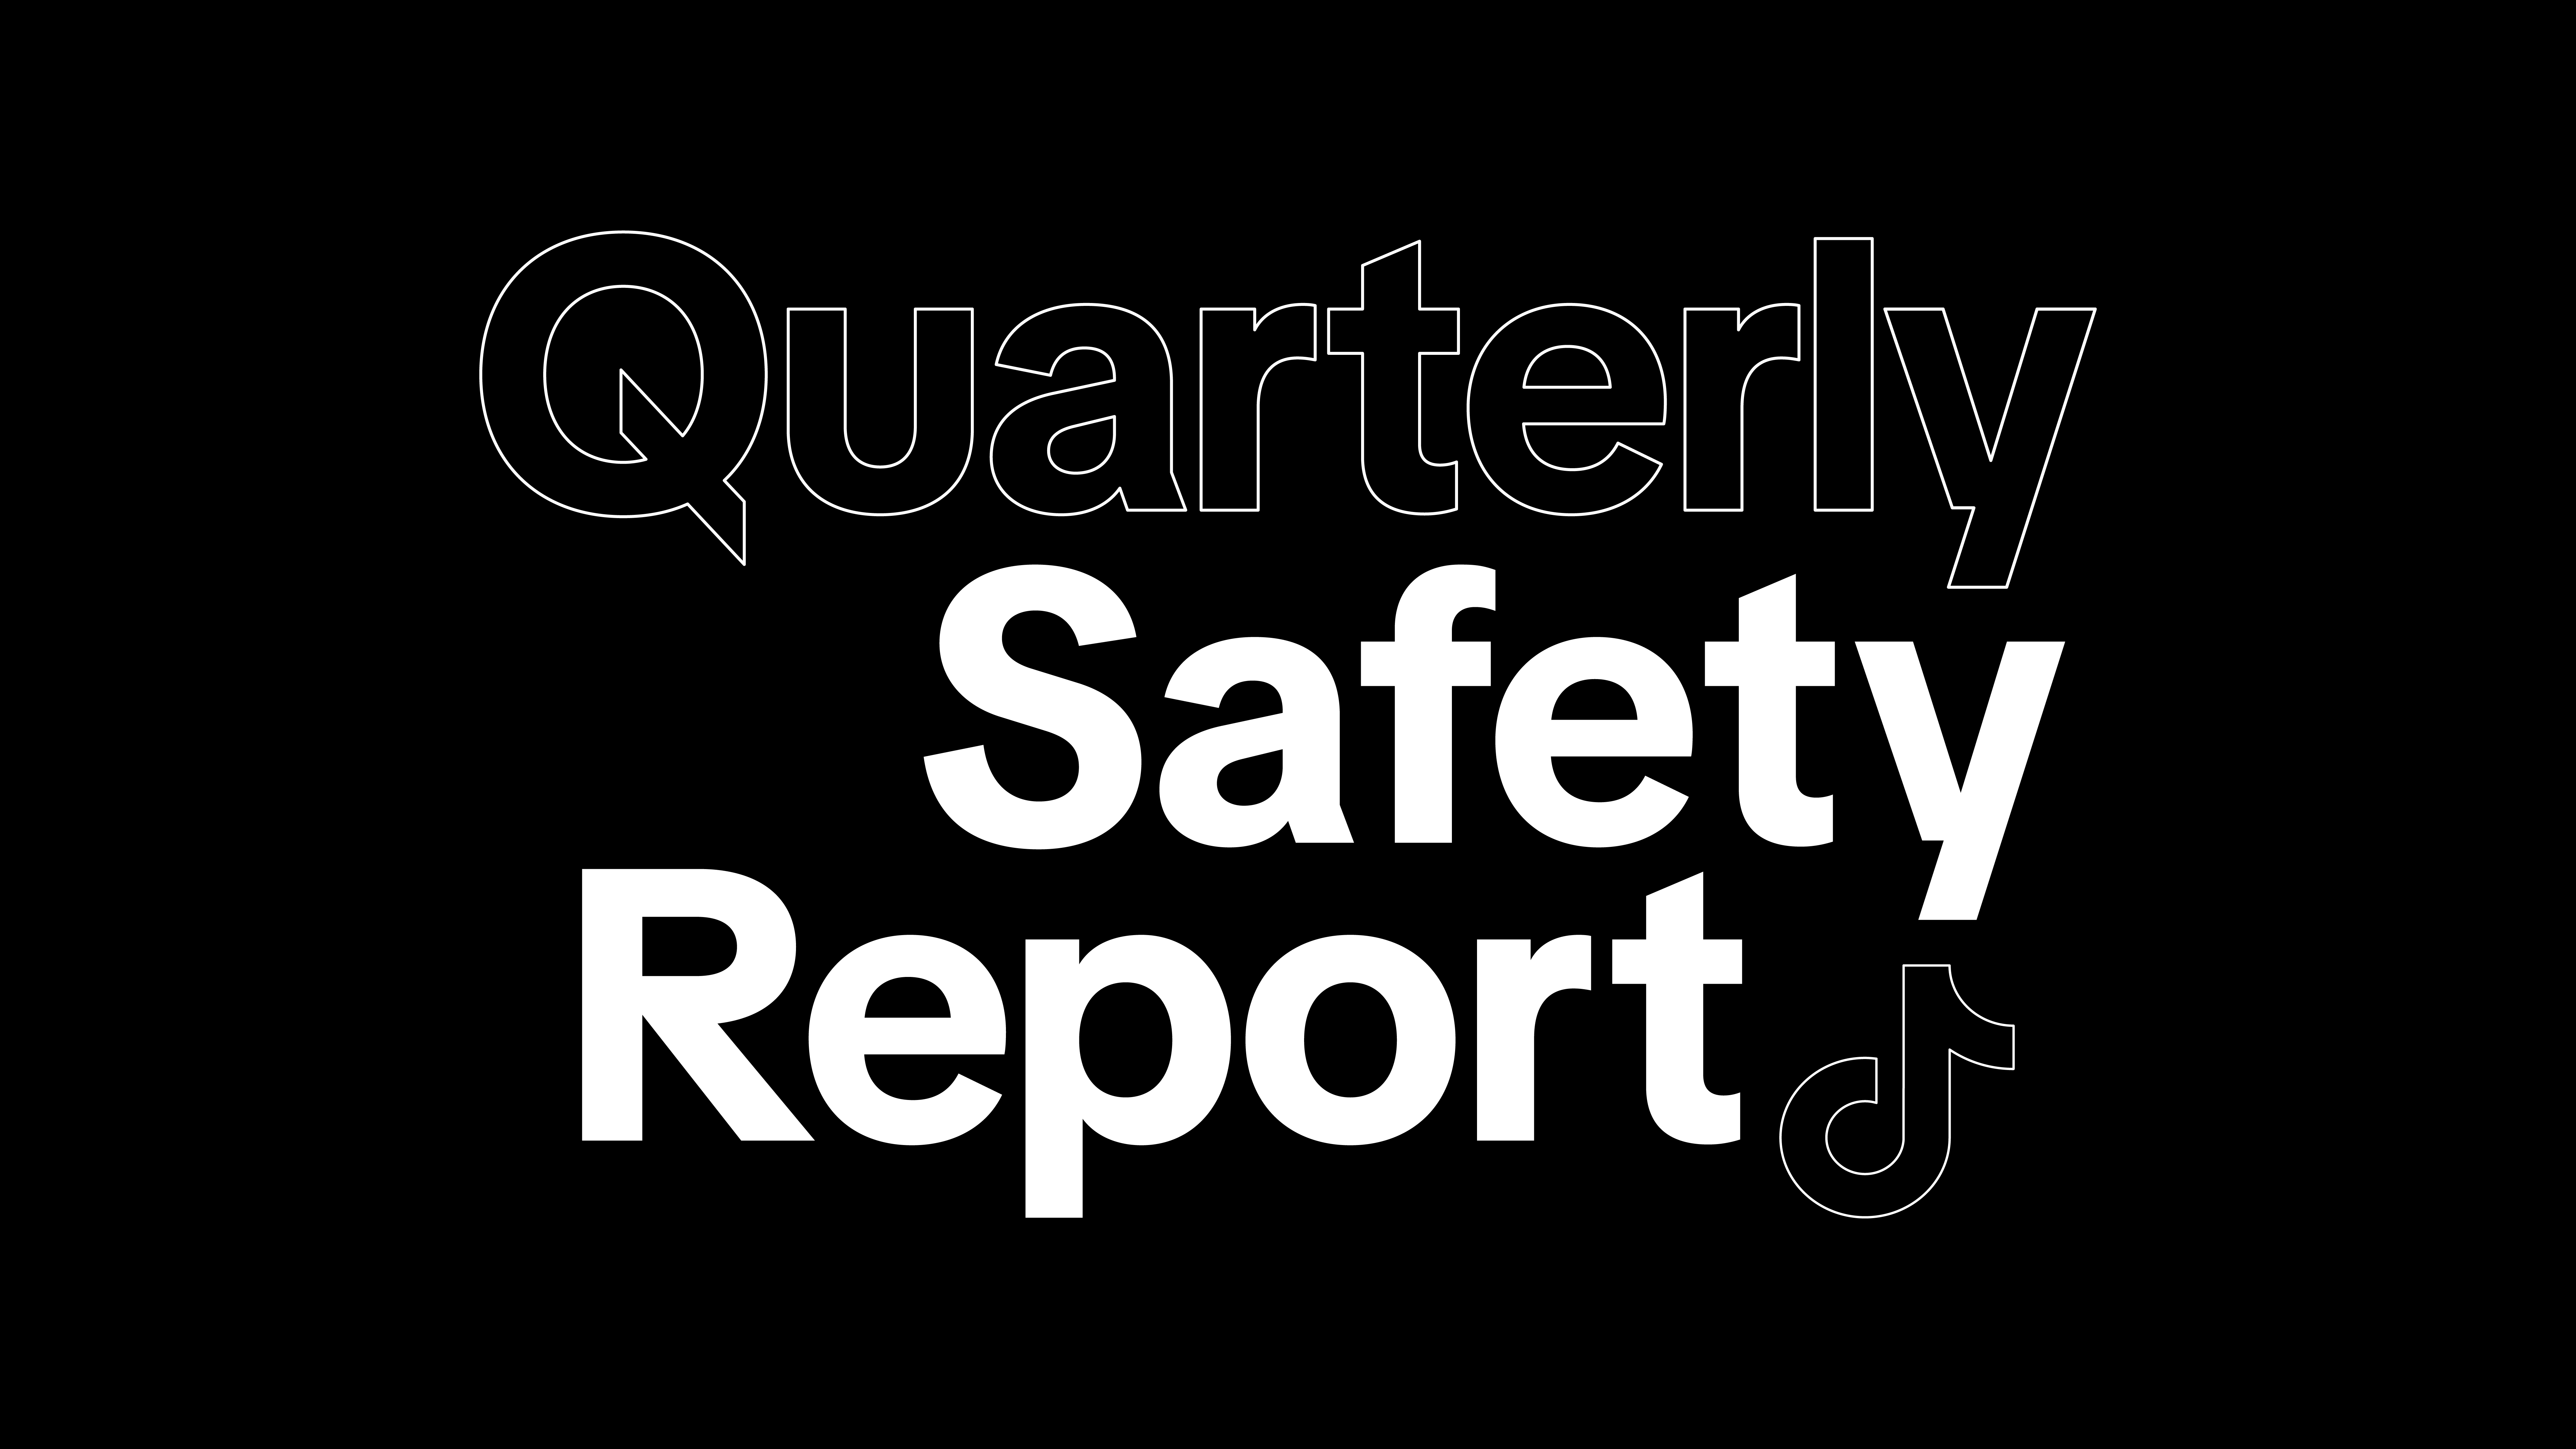 Quarterly Safety Report title